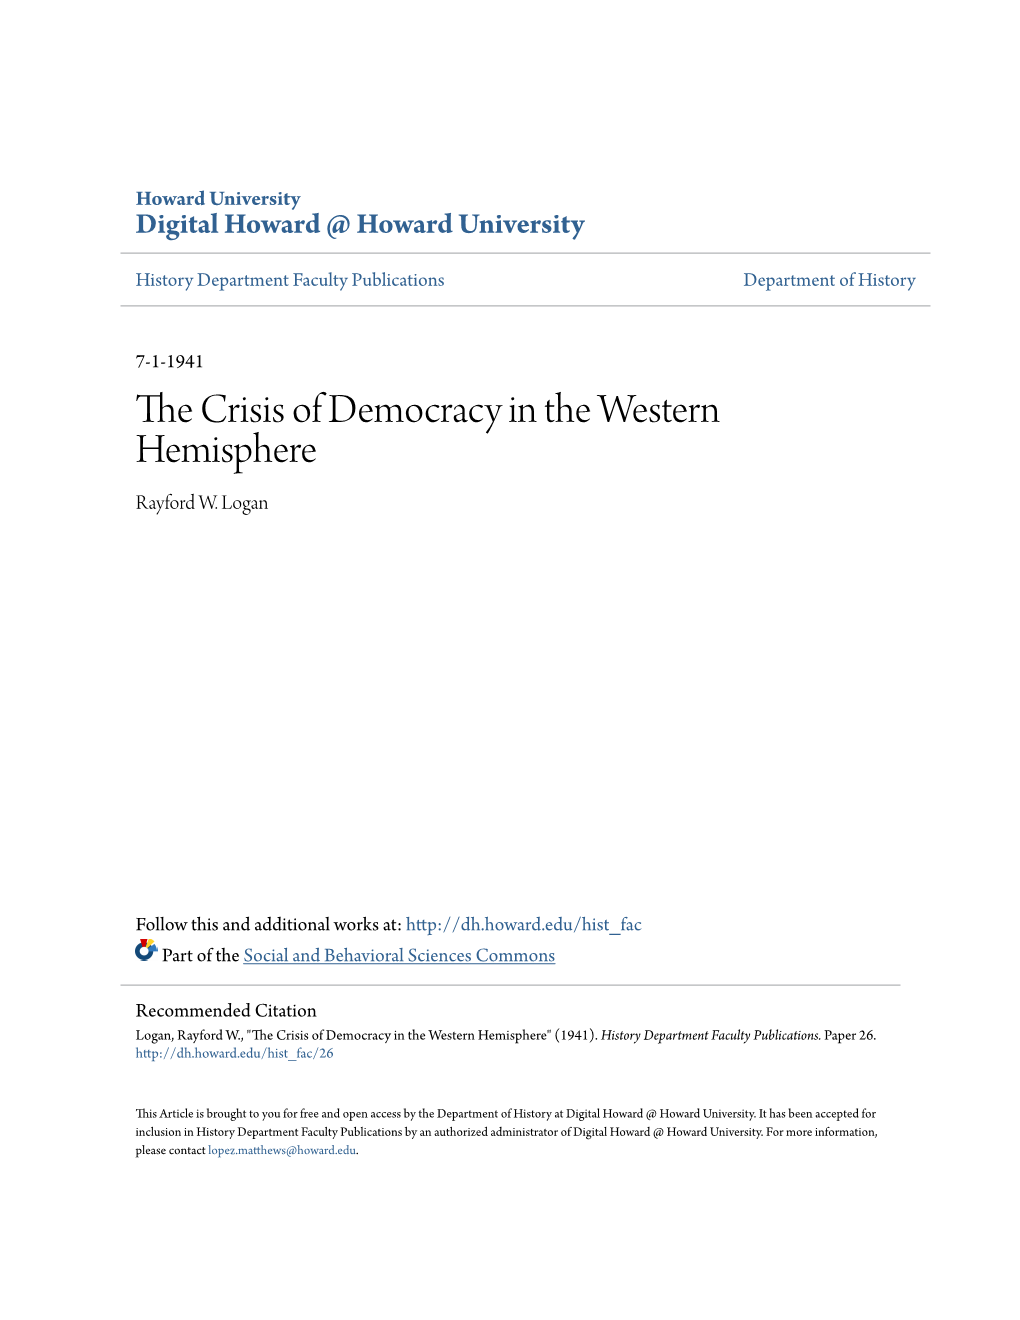 The Crisis of Democracy in the Western Hemisphere